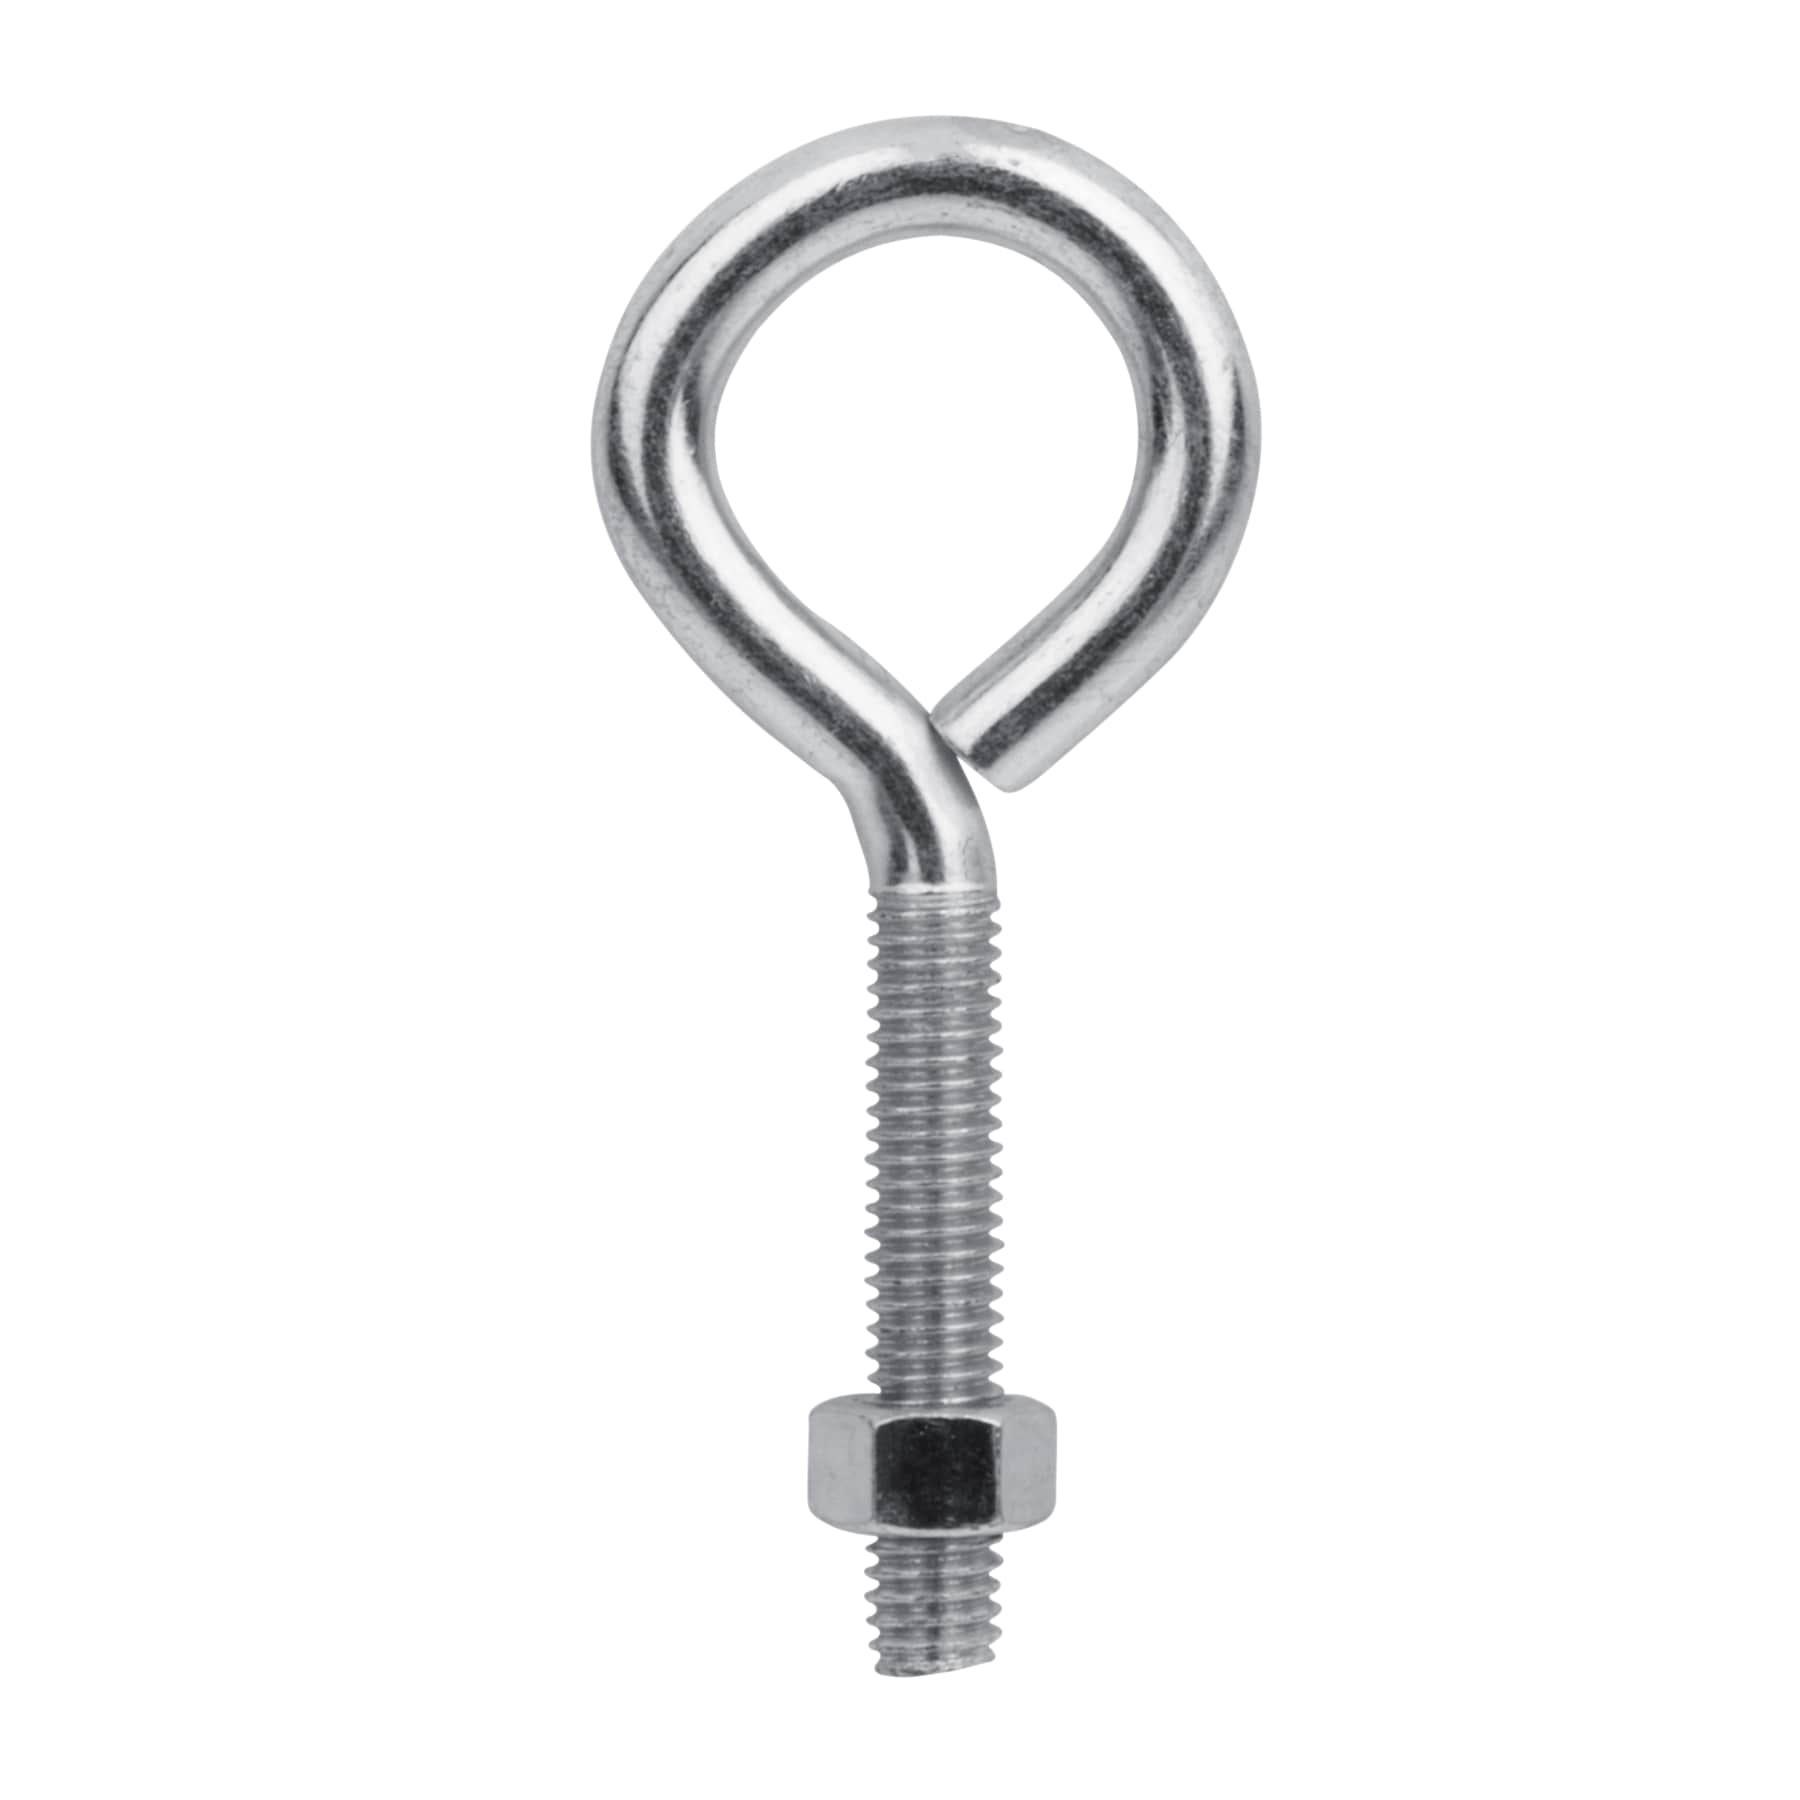 What Are The Different Types of Eye Bolts Used for Overhead Lifts